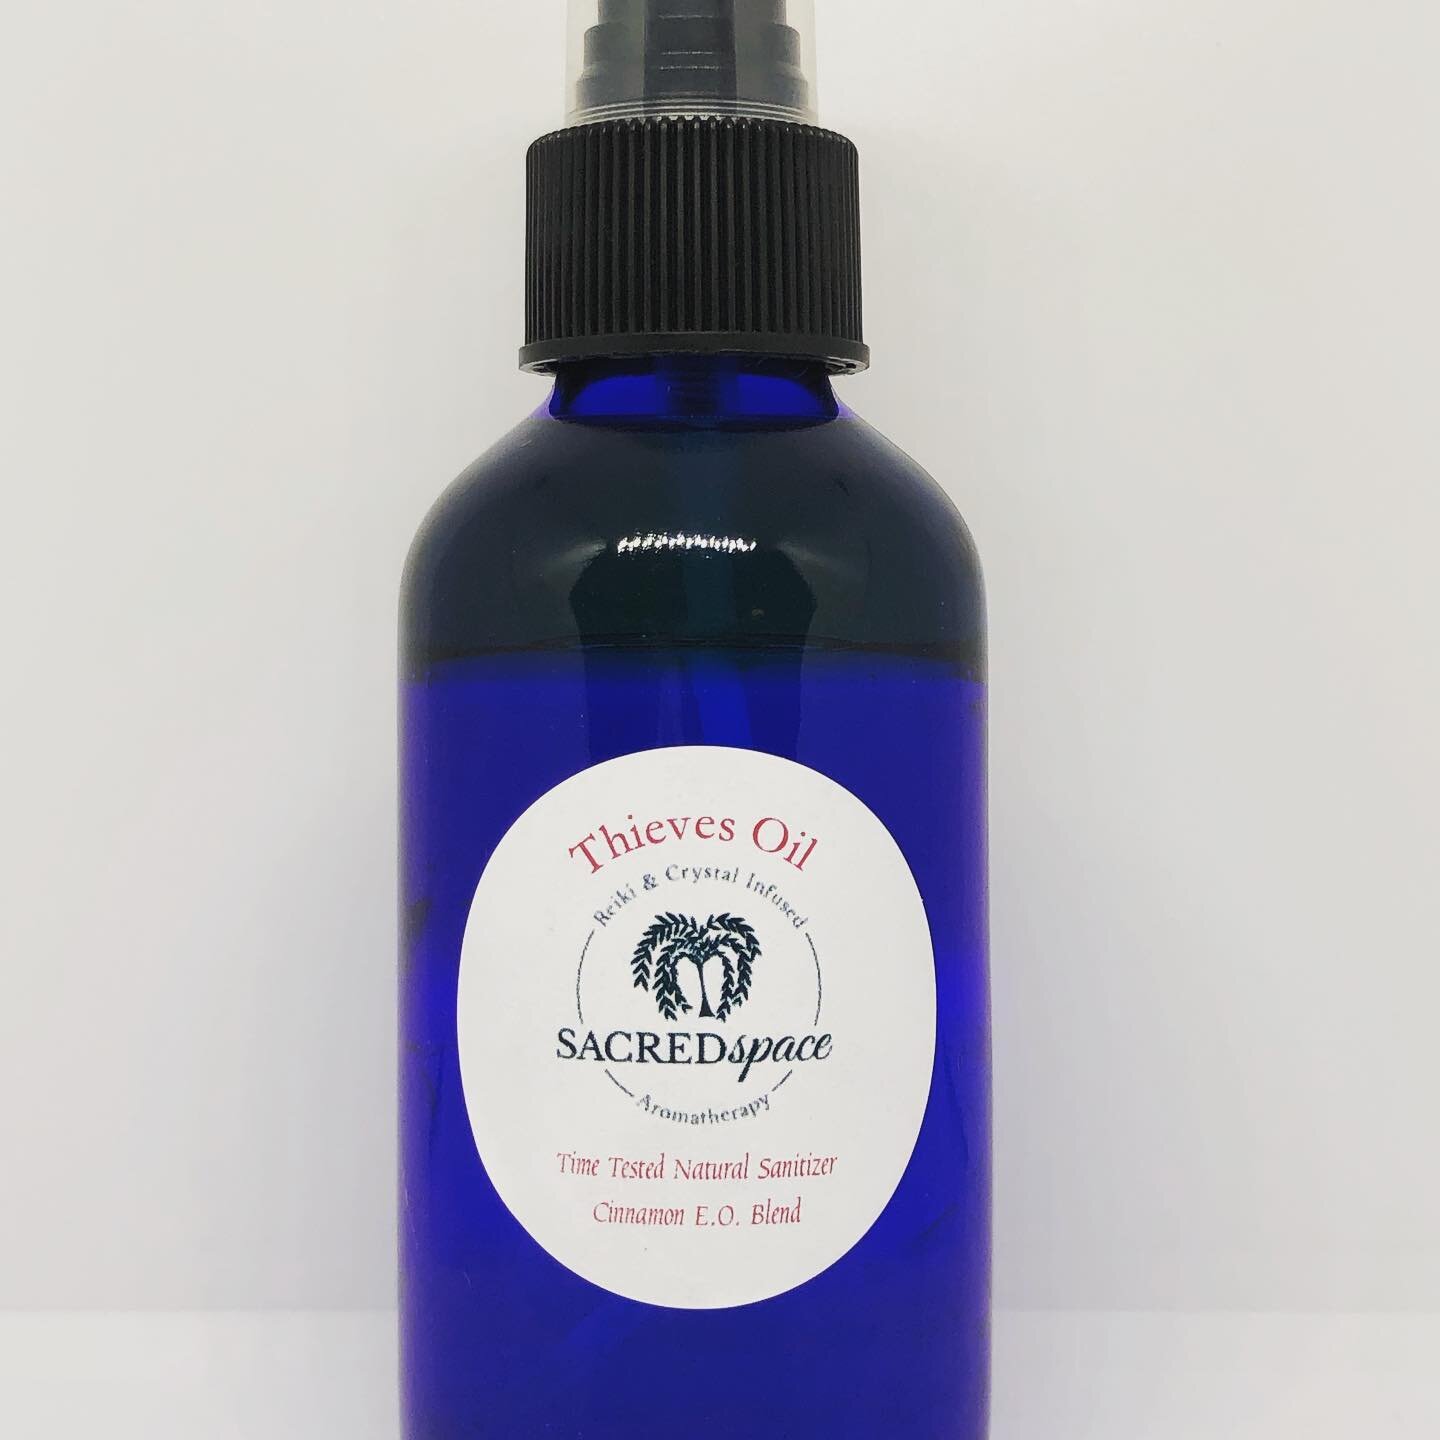 Wash your hands and spray your environment down with Thieves Oil.  https://sacredspacedenver.com/shop/thieves-oil-immune-boost #coronavirus #sacred_space_denver